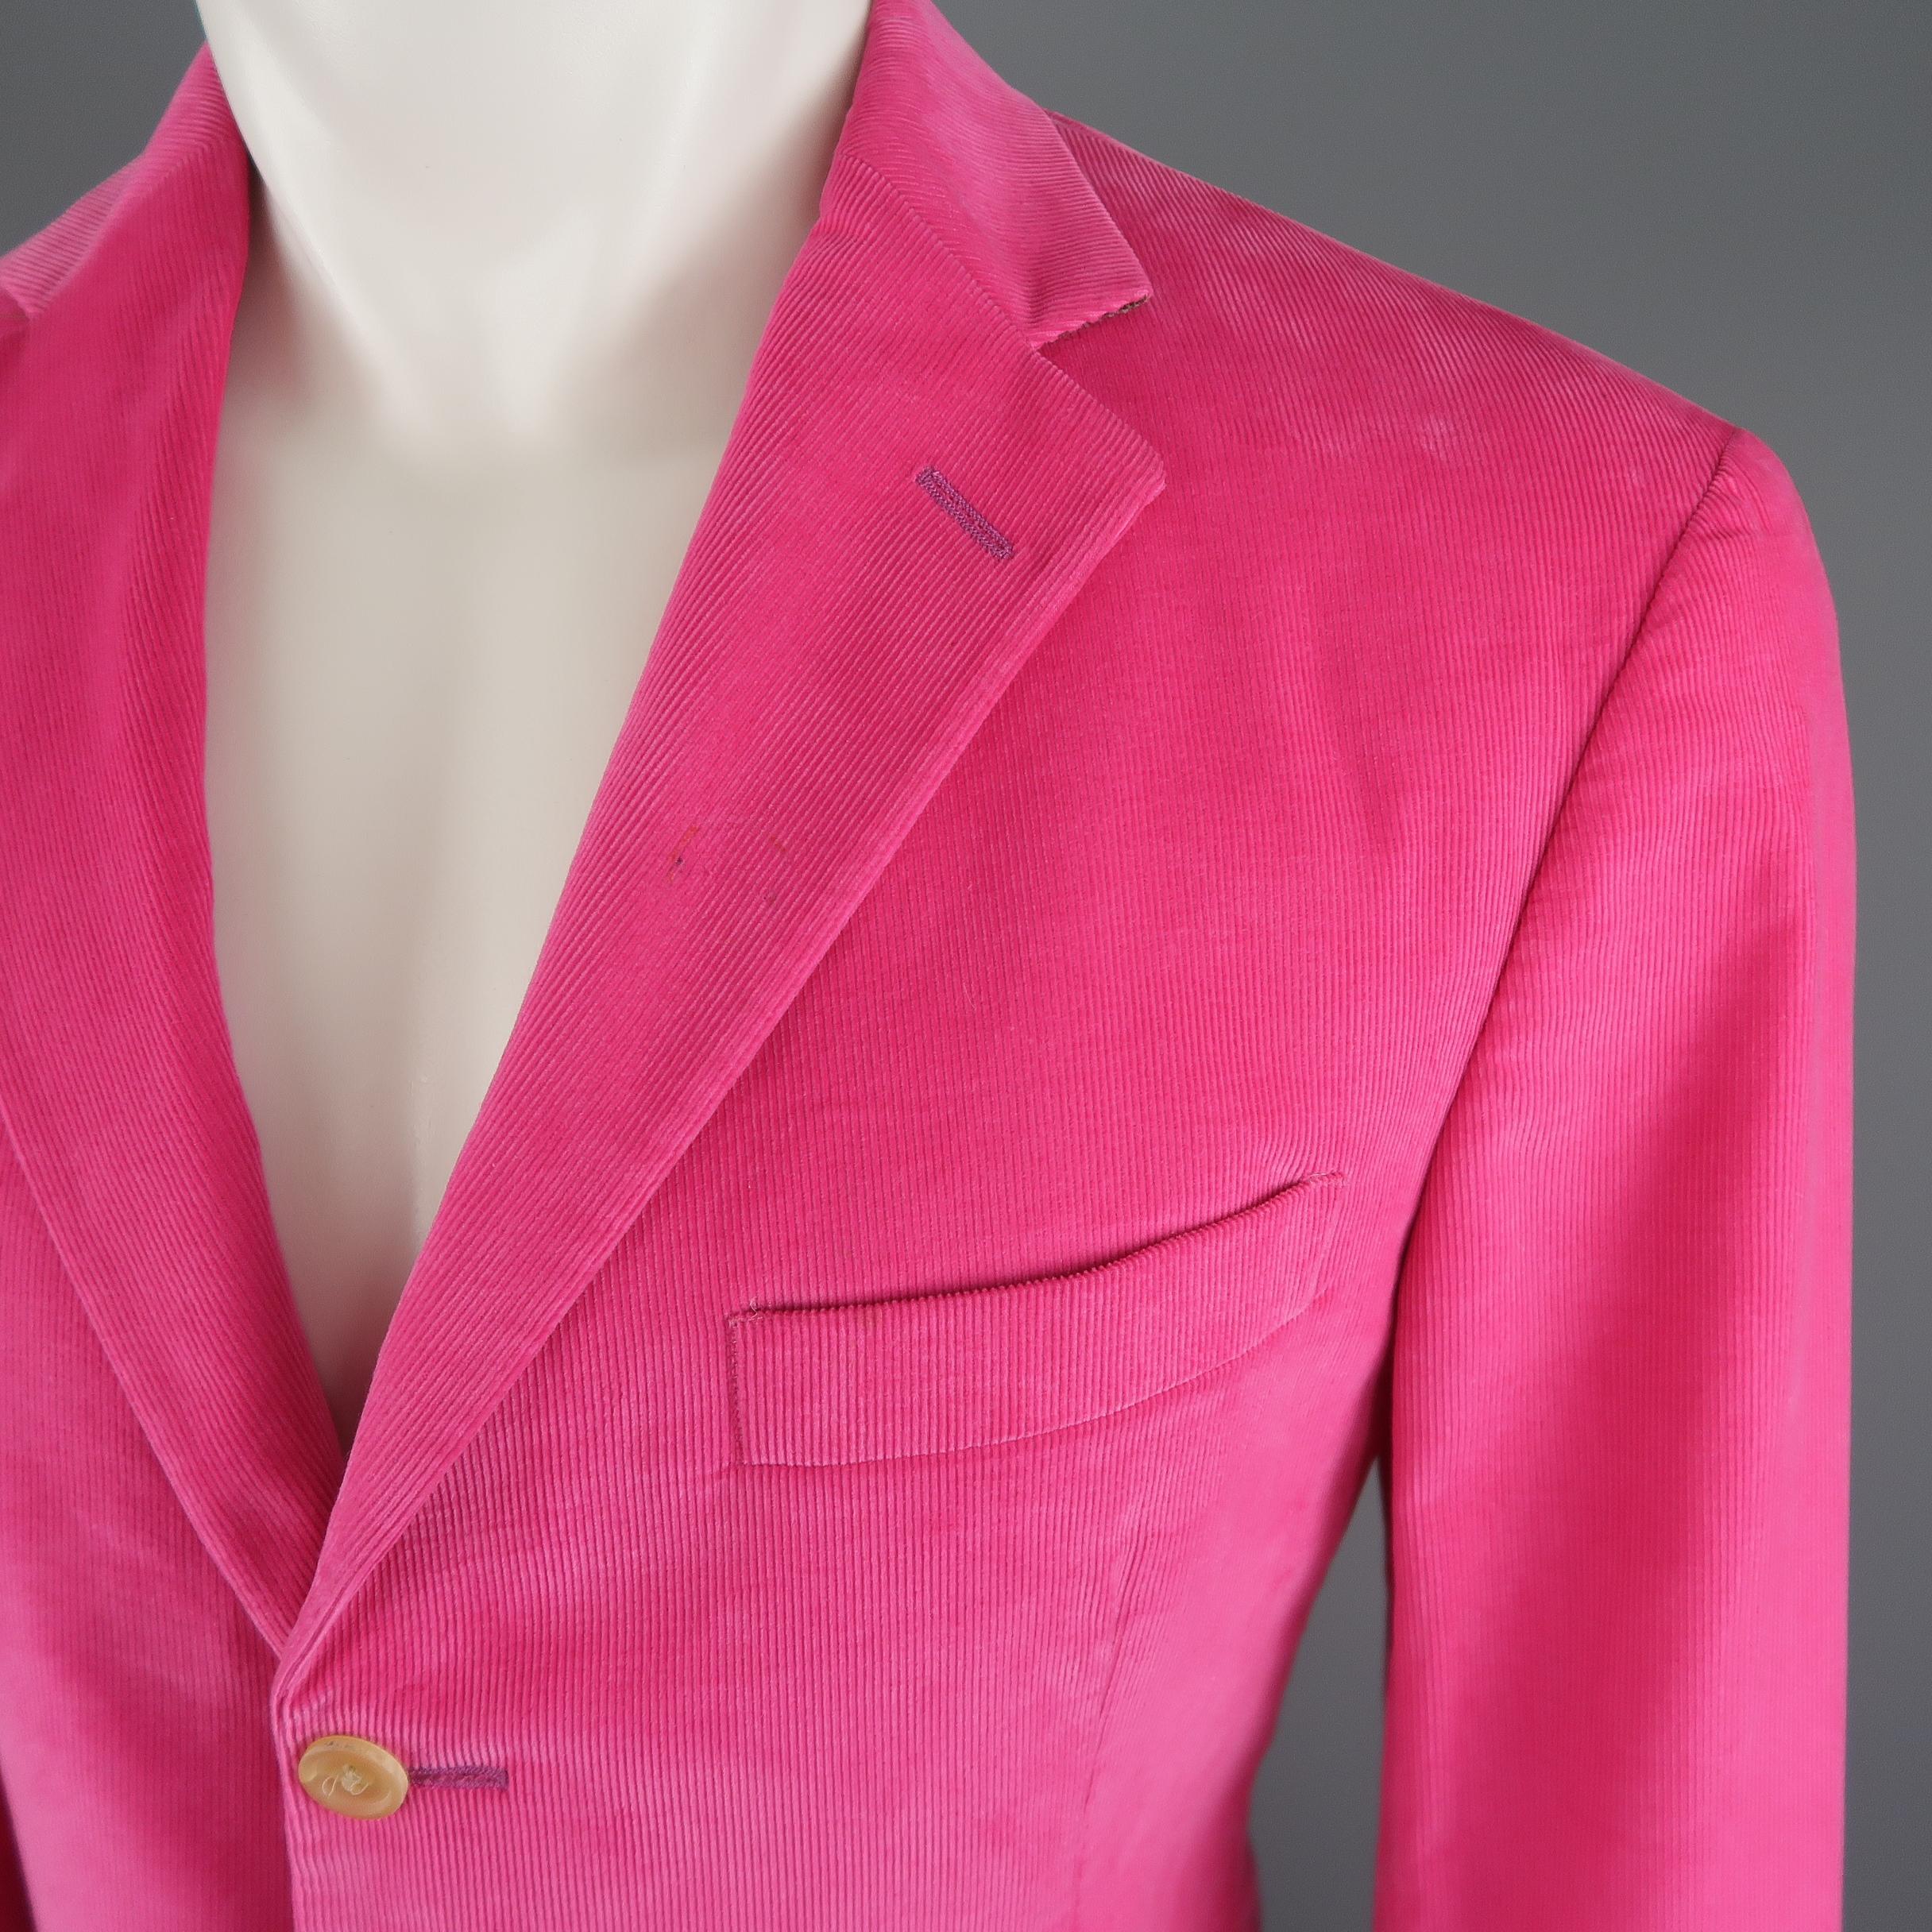 POLO RALPH LAUREN sport coat comes in fuchsia pink corduroy with a notch lapel, three button, single breasted front, and patch flap pockets. Small discoloration on lapel. Made in Italy. Retail price $ 1,200.00
 
Good Pre-Owned Condition.
Marked: M
